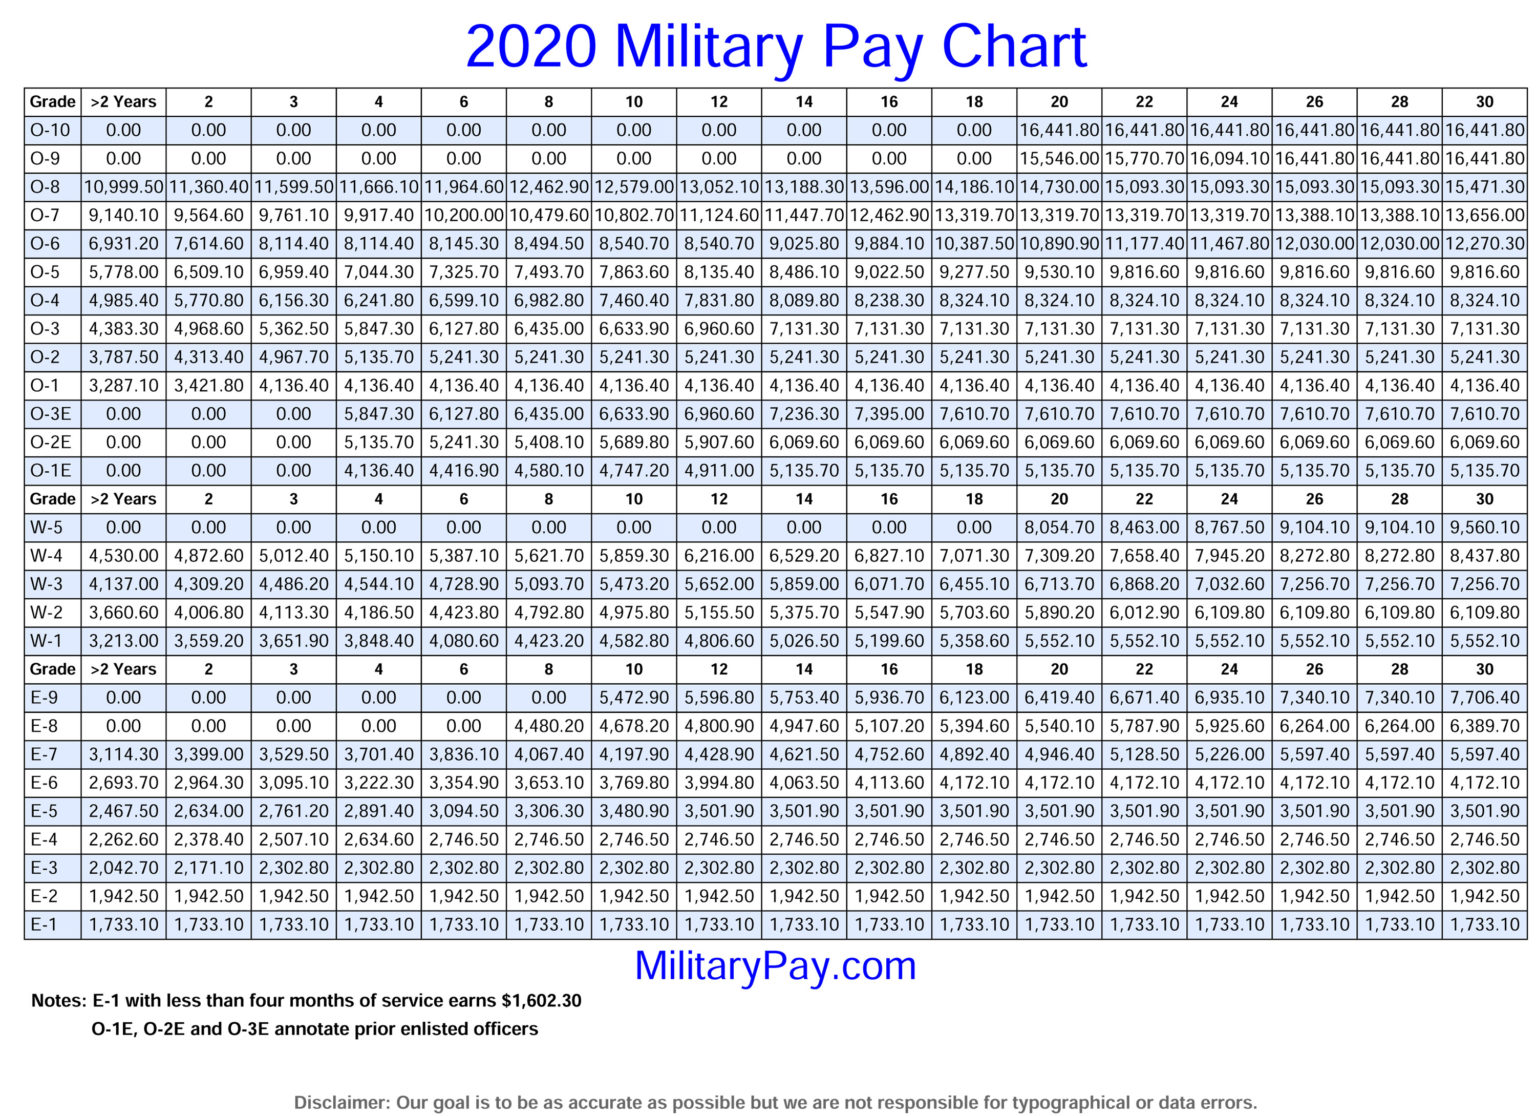 Military Pay Charts 1949 To 2021 Plus Estimated To 2050 69 1536x1116 